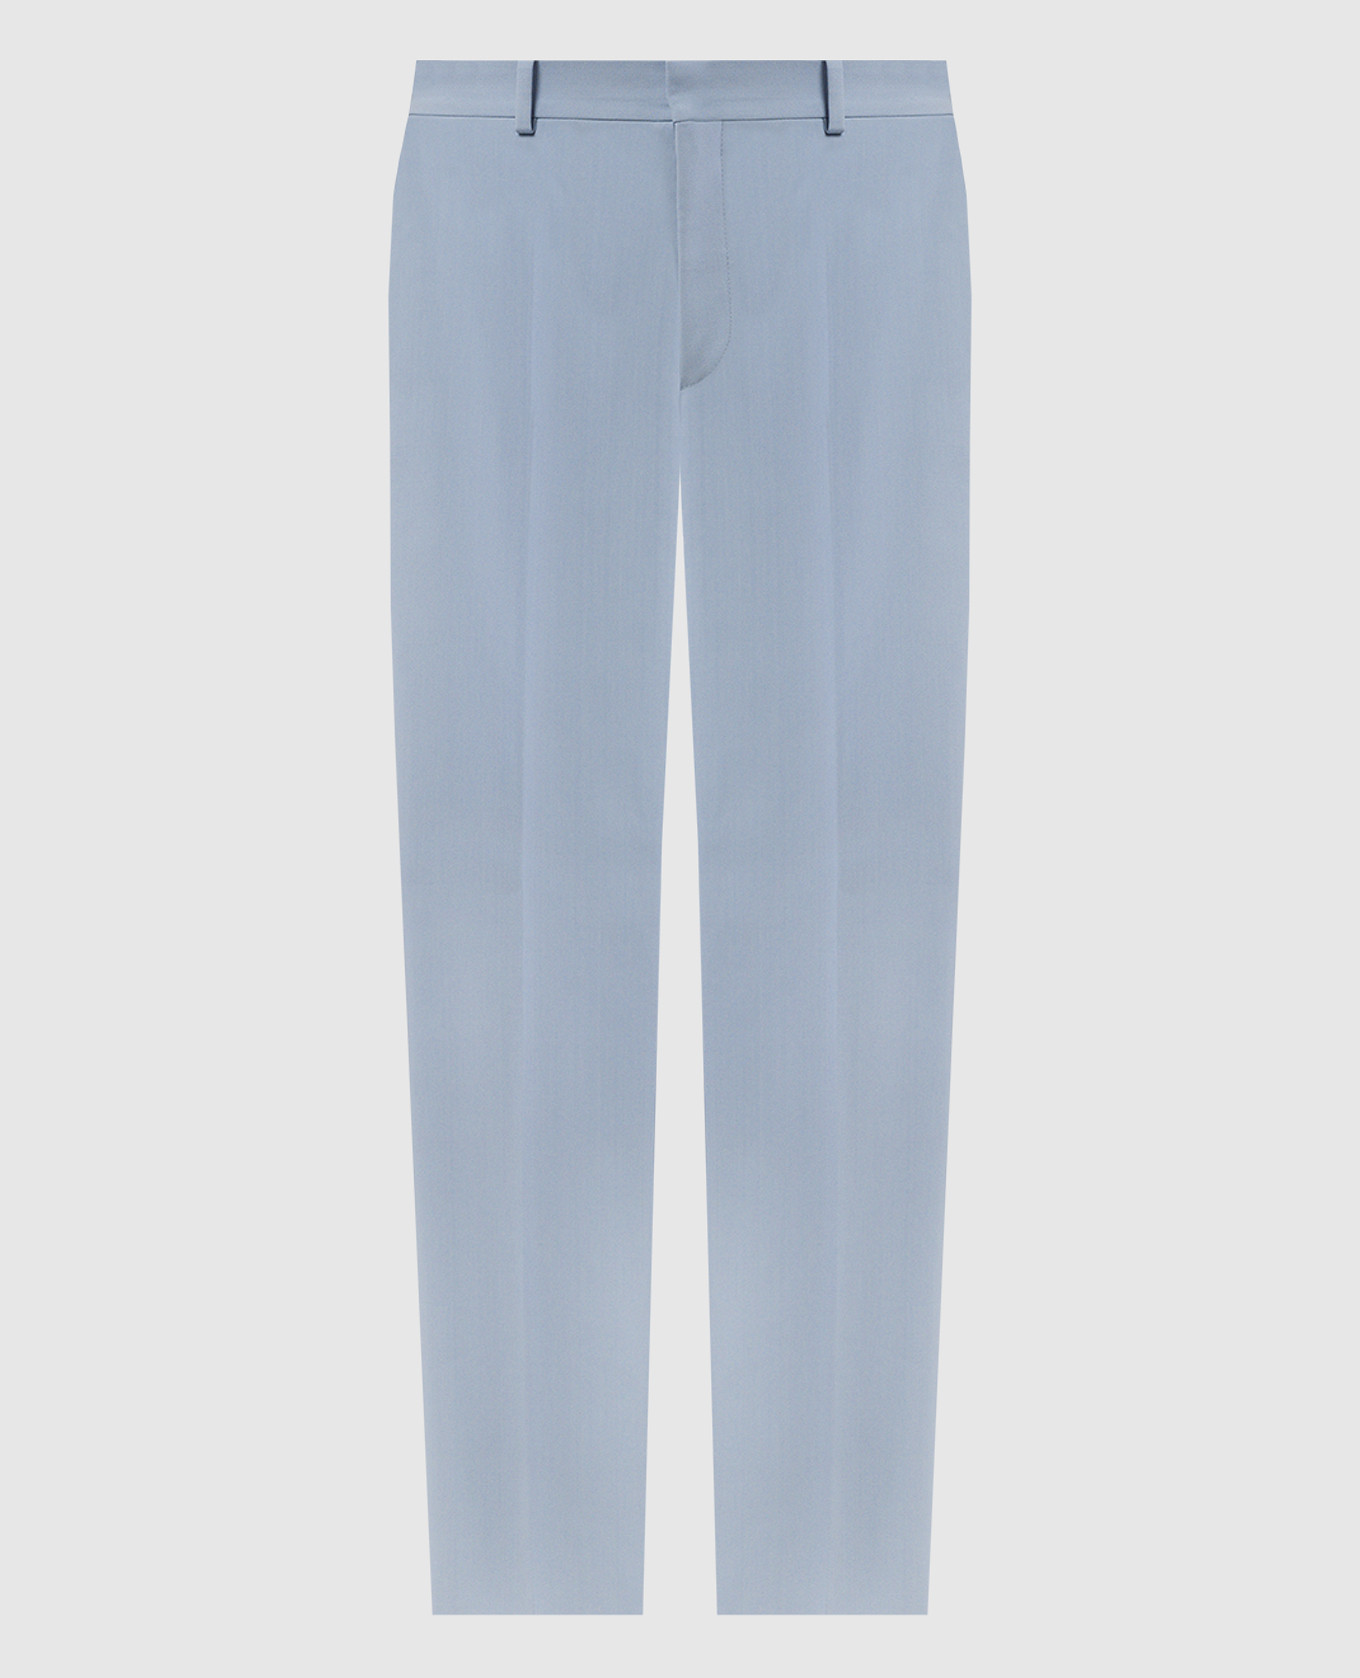 Blue pants with wool